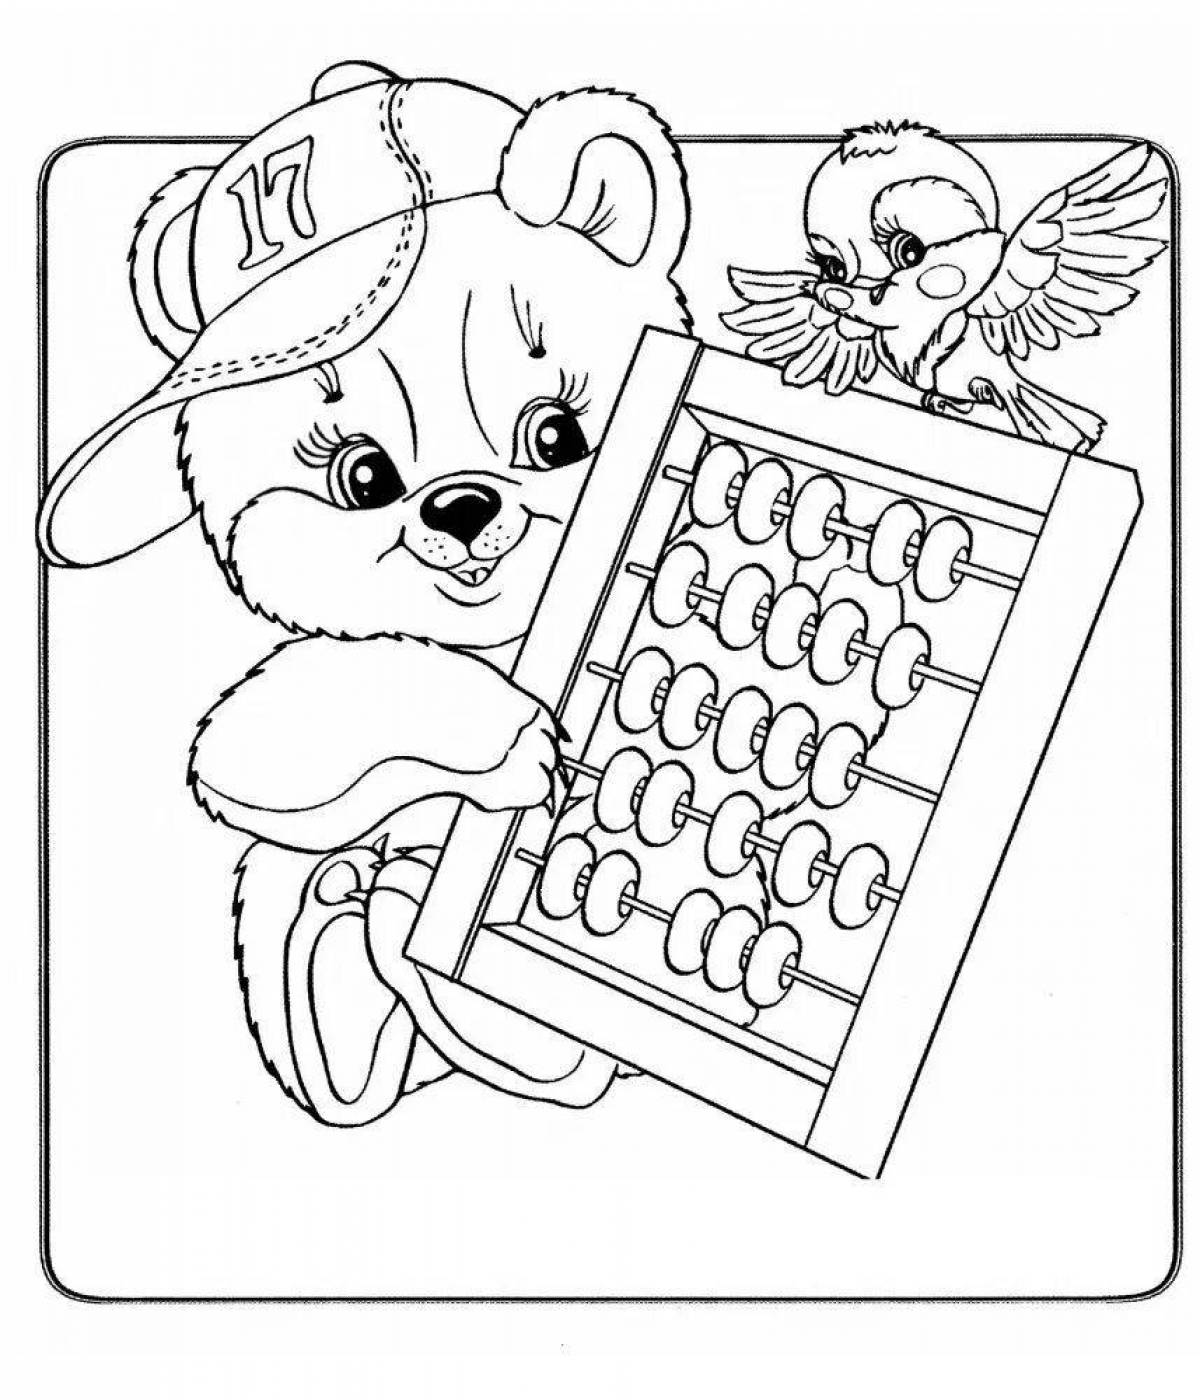 Colorful 3rd grade financial literacy coloring book